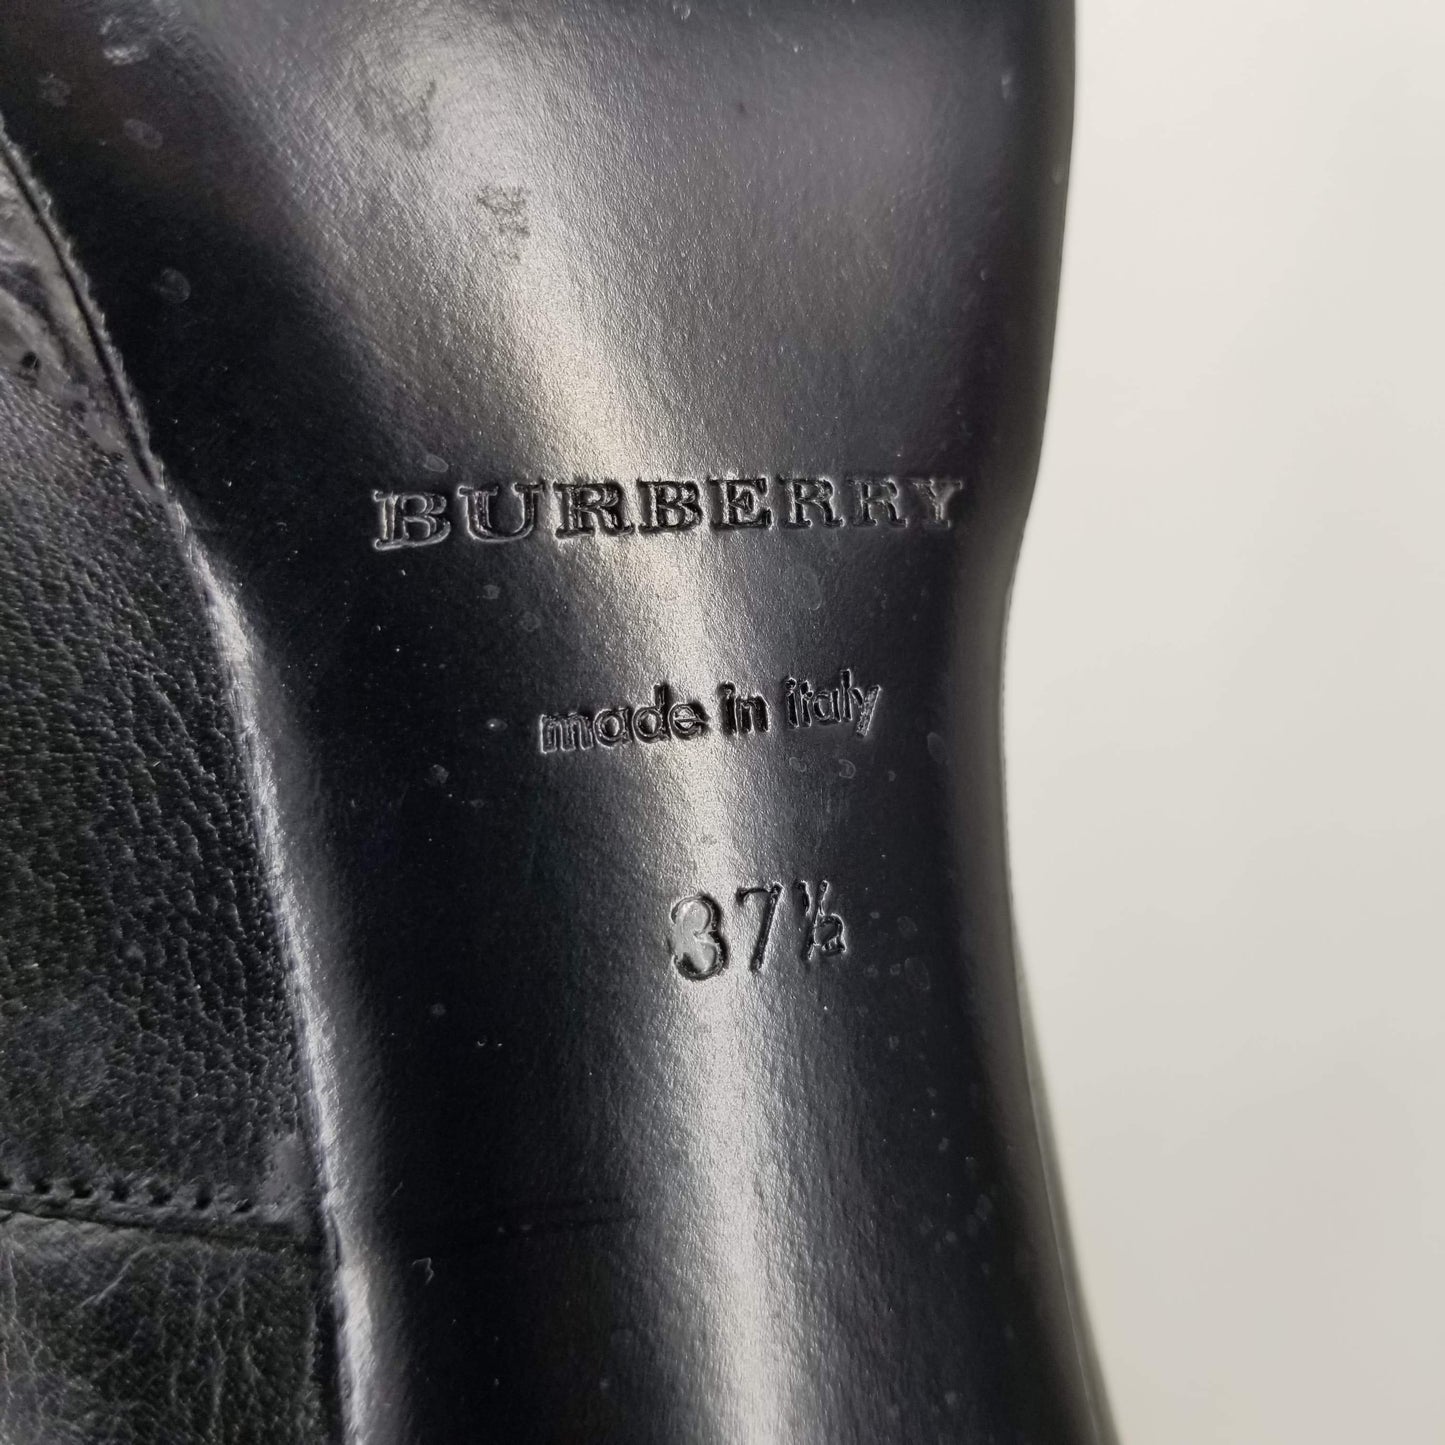 Authentic Burberry Black Leather Manners Boots Sz 37.5